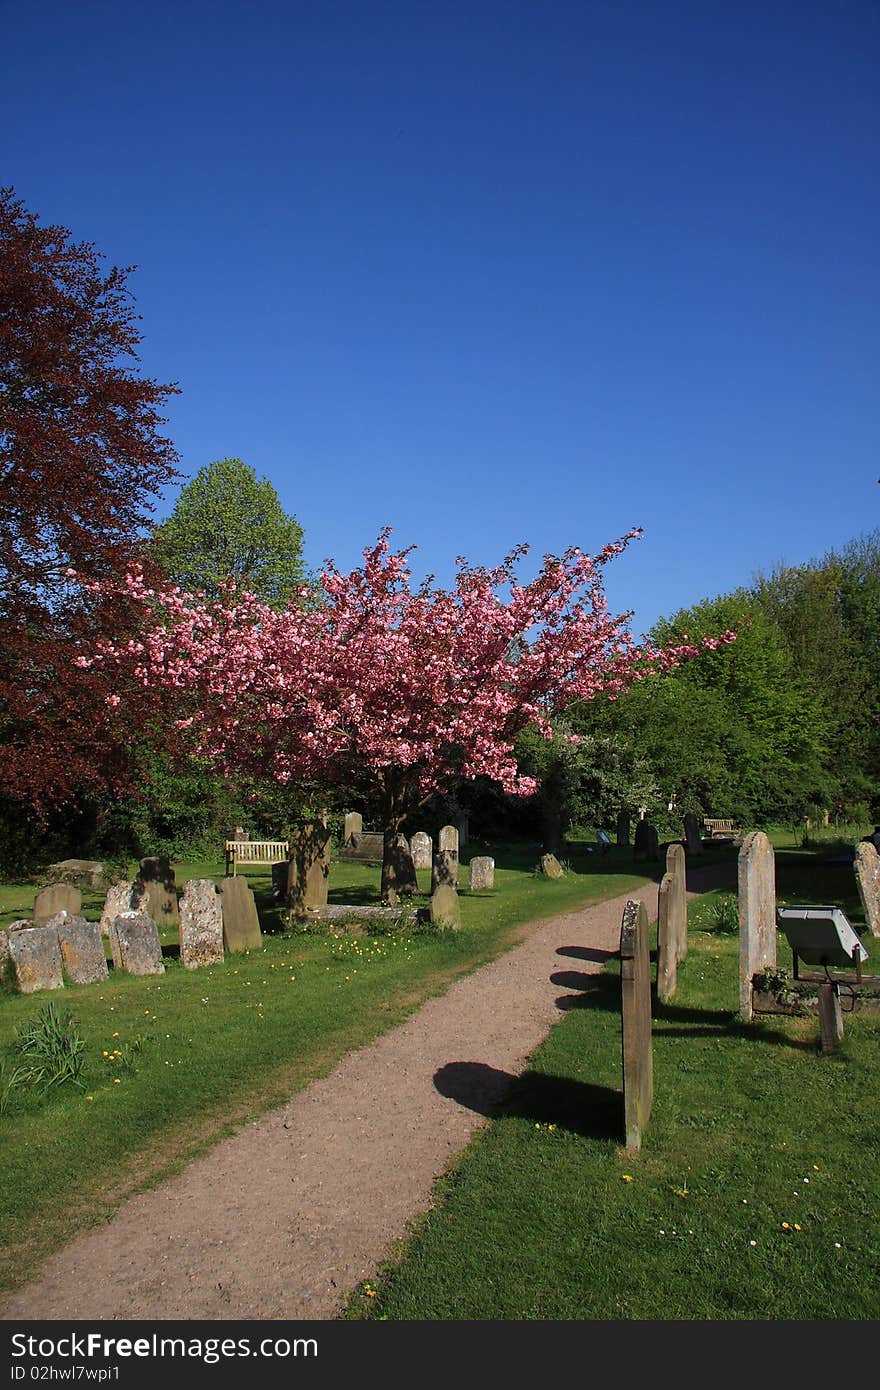 Beautilful springtime blossoms in an English churchyard. Beautilful springtime blossoms in an English churchyard